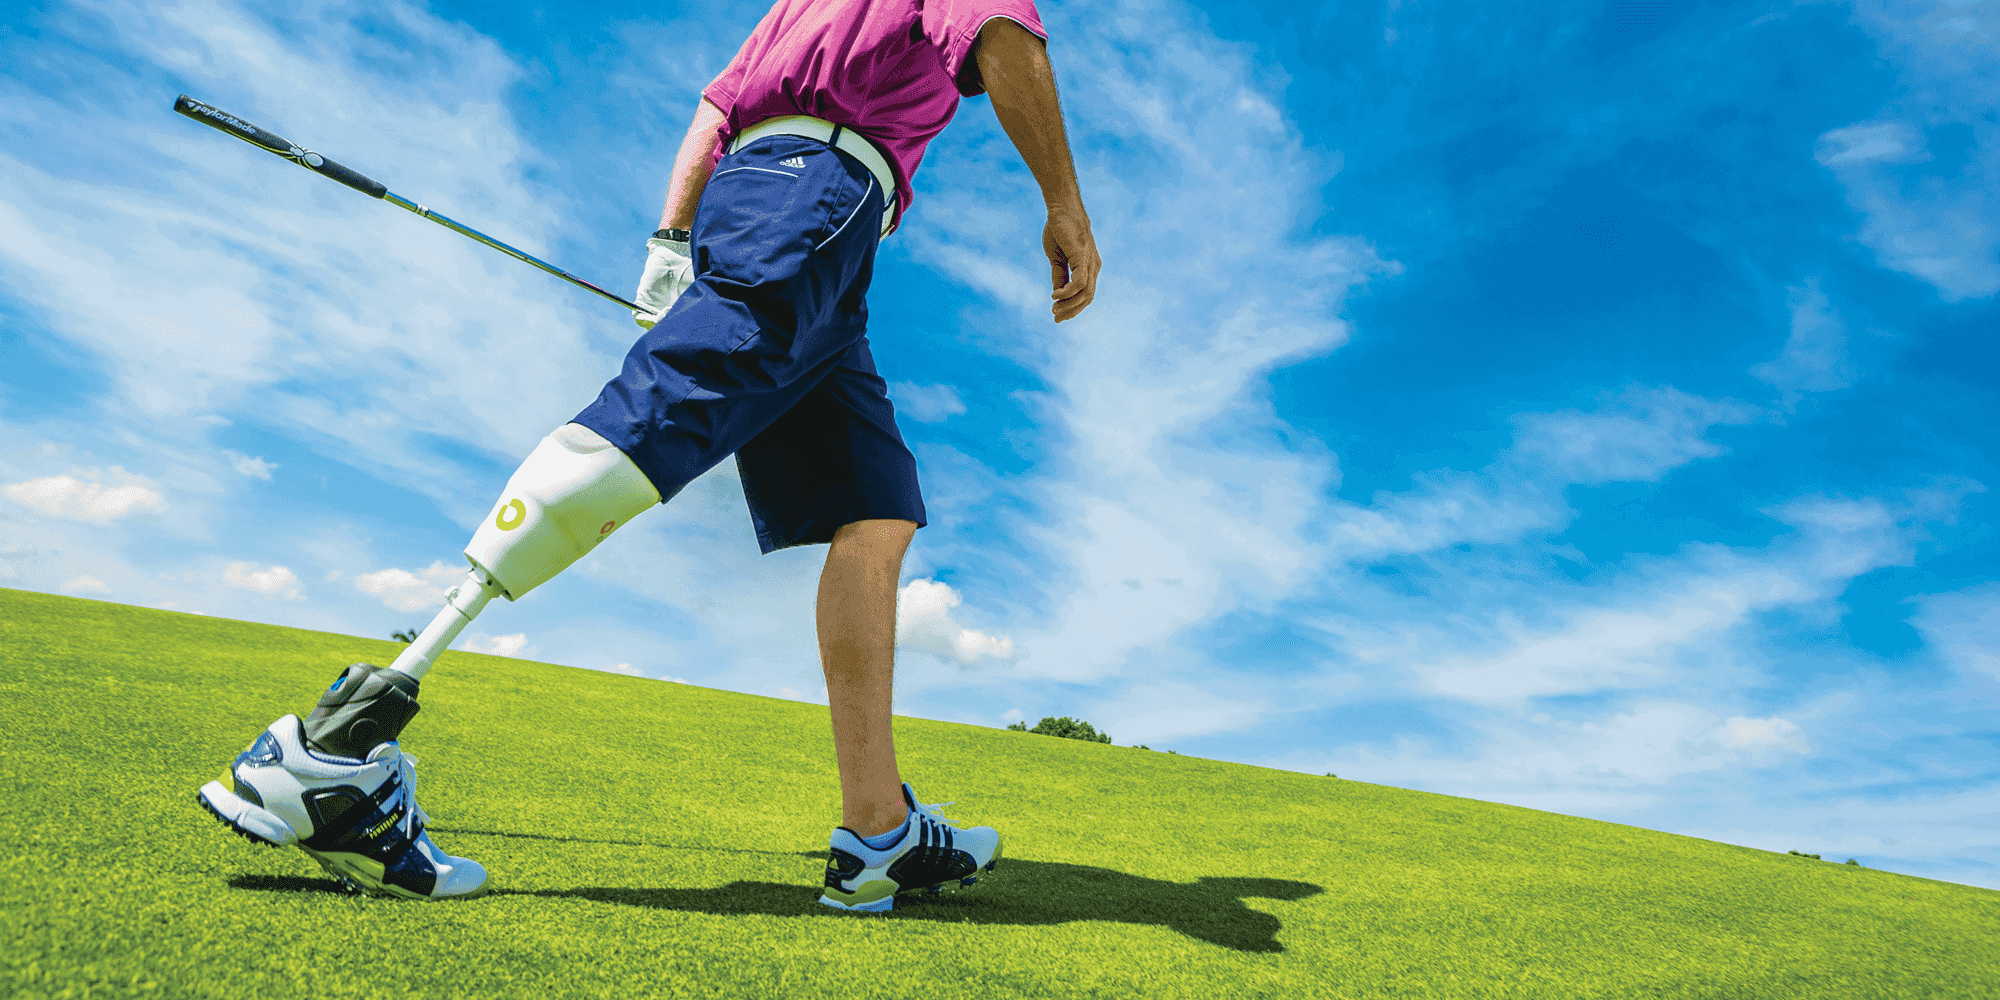 Man with Orthocare Prosthetic Playing Golf